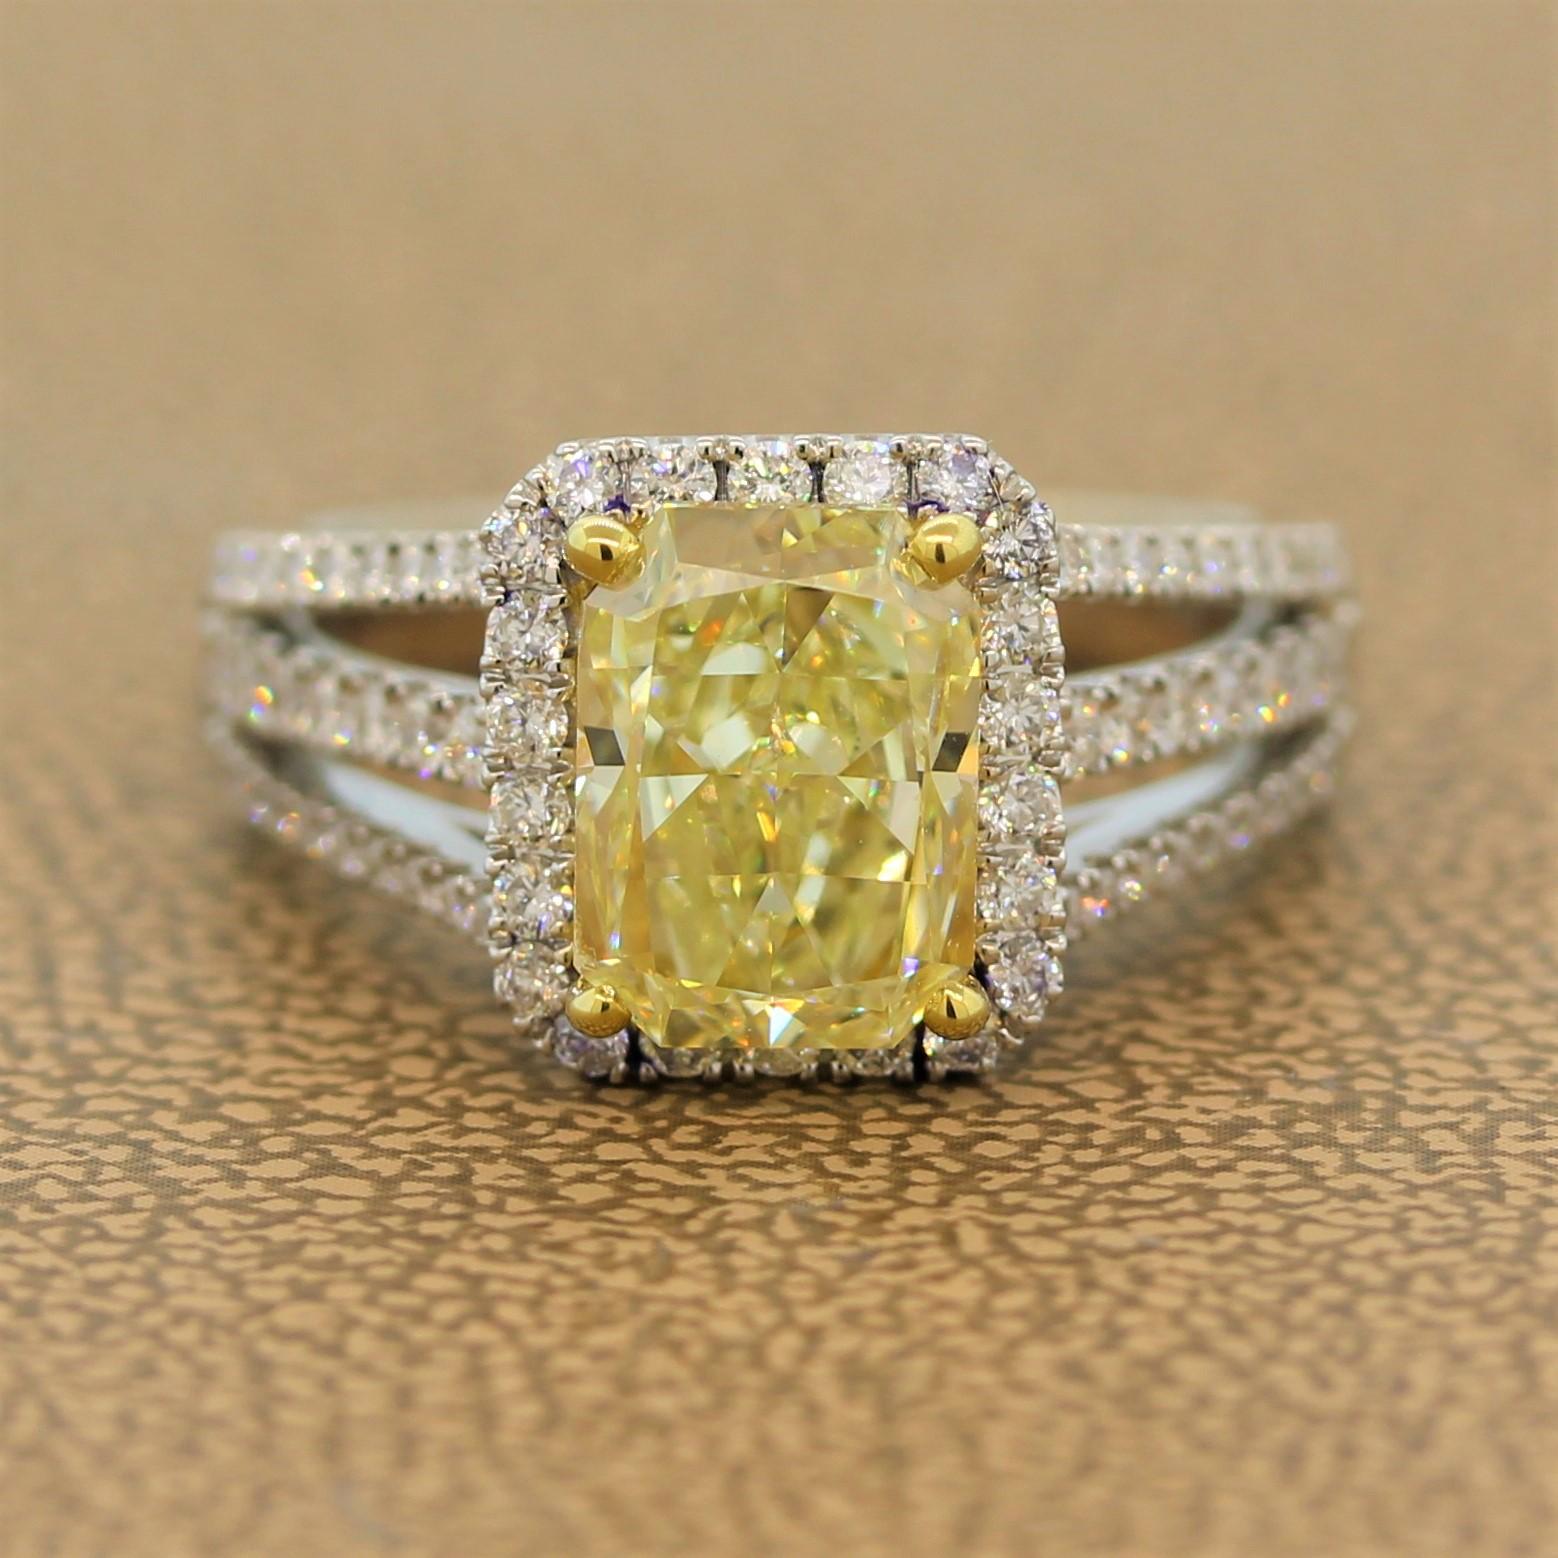 A spectacular ring featuring a 3.01 carat fancy yellow diamond in an 18K yellow gold setting. The radiant cut diamond is haloed by 0.76 carats of diamonds that go along the double split shank of the 18K white gold ring. 

Ring Size 6.50 (Sizable)
